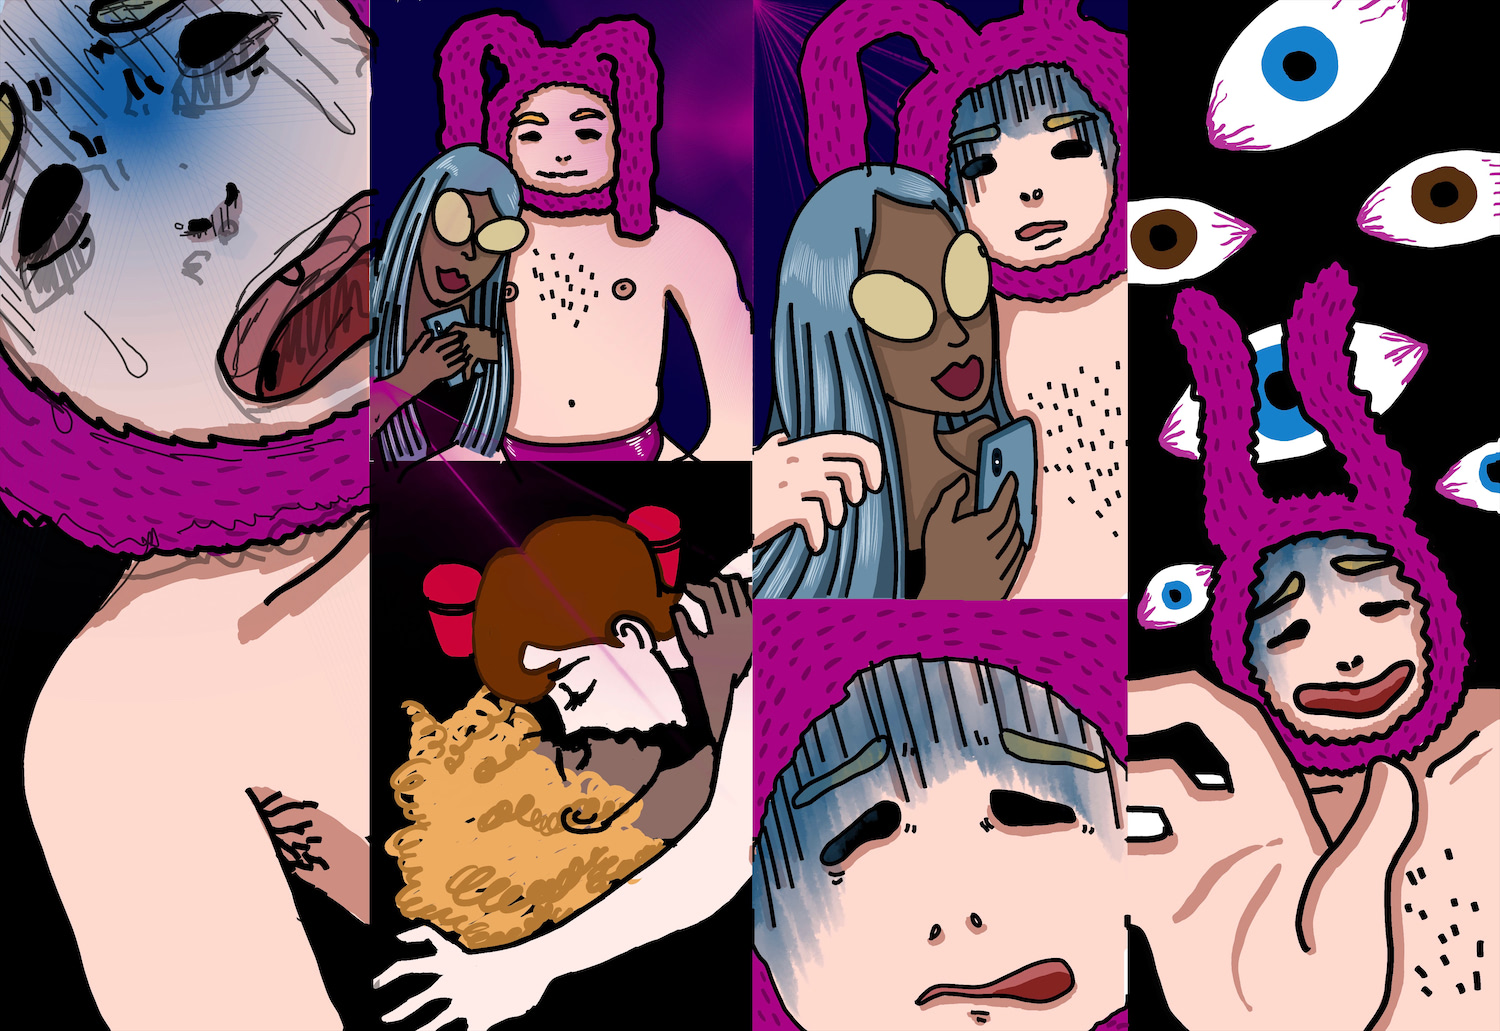 Preview of Pinkman's comic. Please go see the full version on my webtoon website.